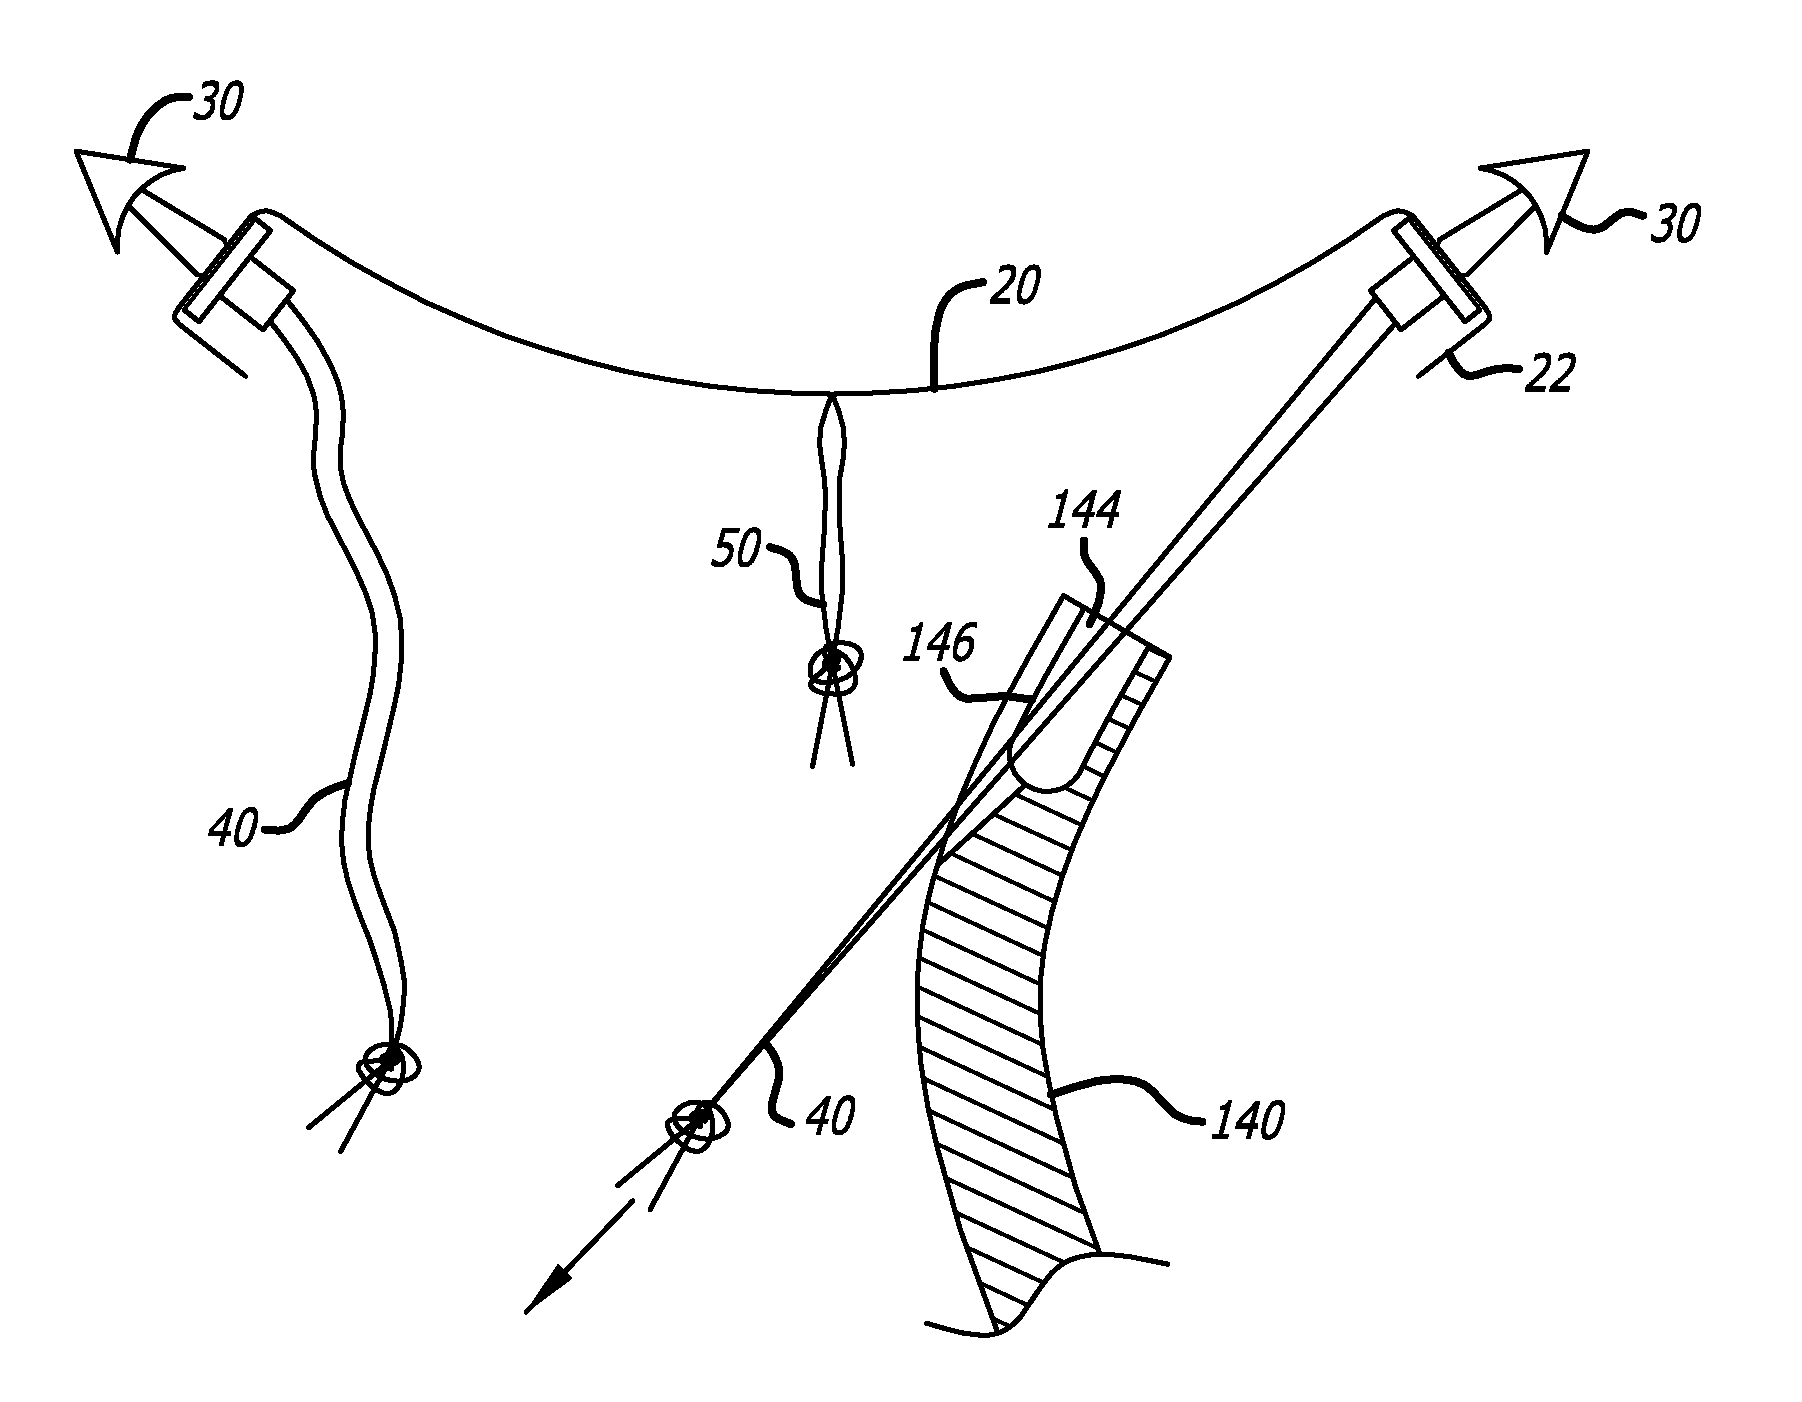 Implants and procedures for supporting anatomical structures for treating conditions such as pelvic organ prolapse